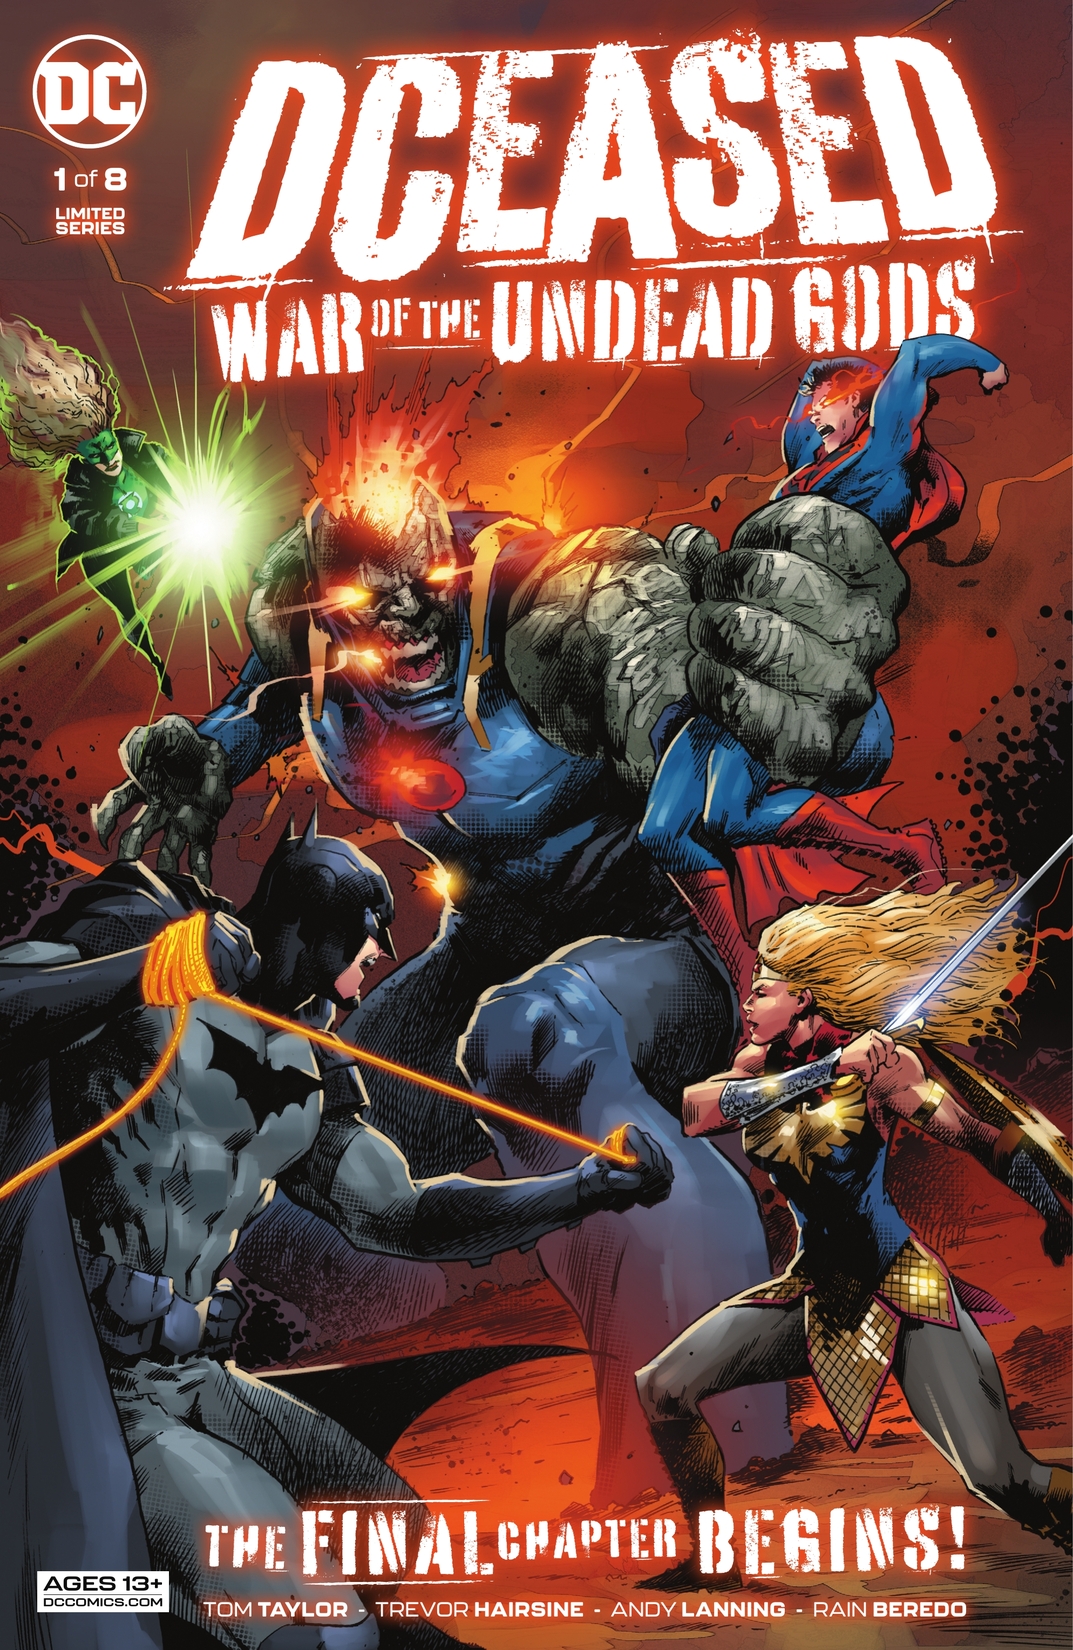 DCeased: War of the Undead Gods #1 preview images